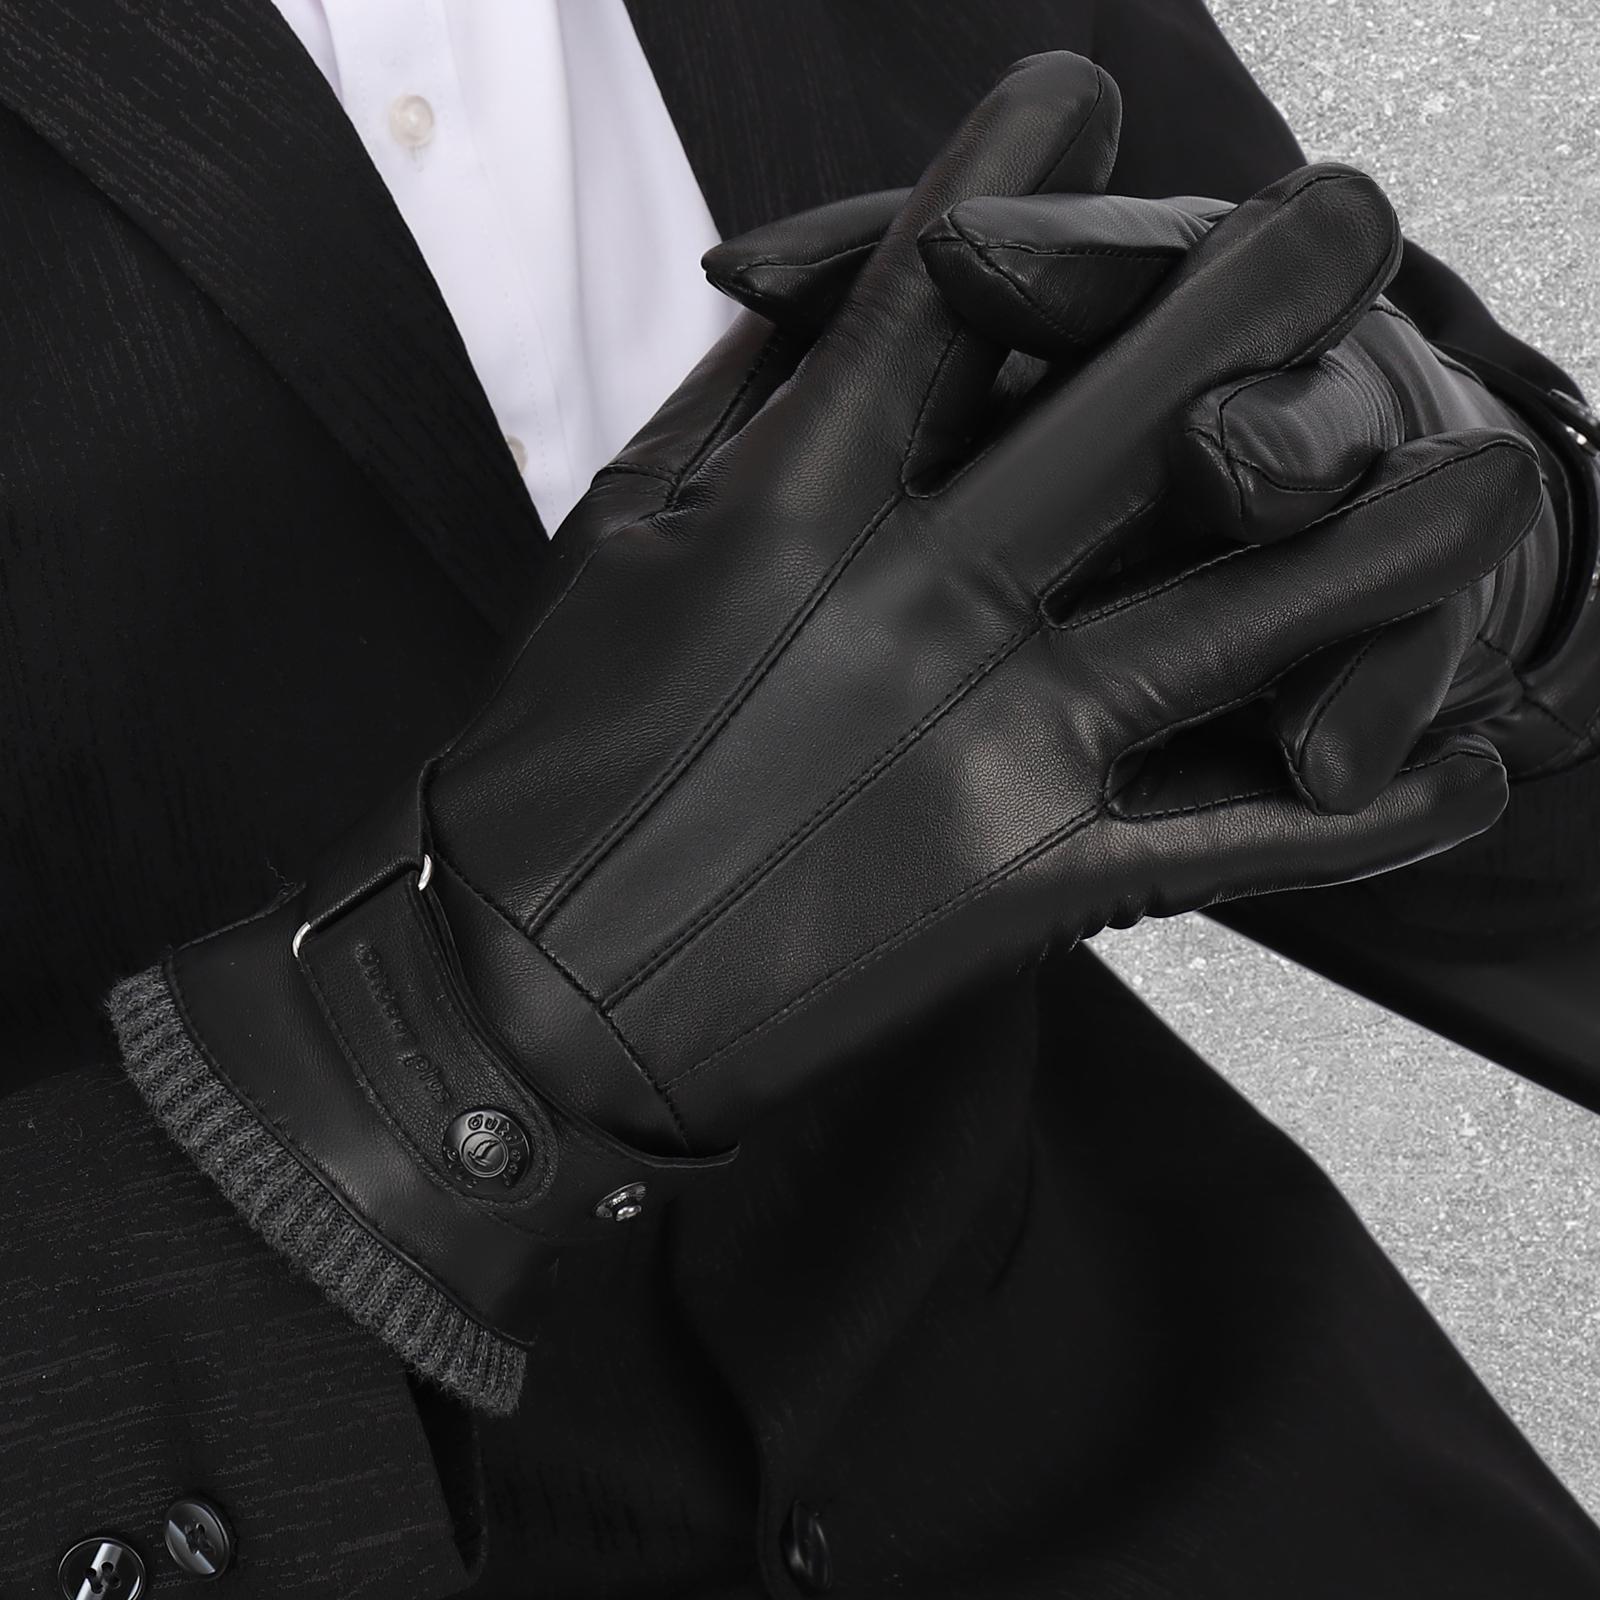 Leather Gloves for Men,Mens Winter Leather Driving Gloves Touchscreen for Gift - image 4 of 10